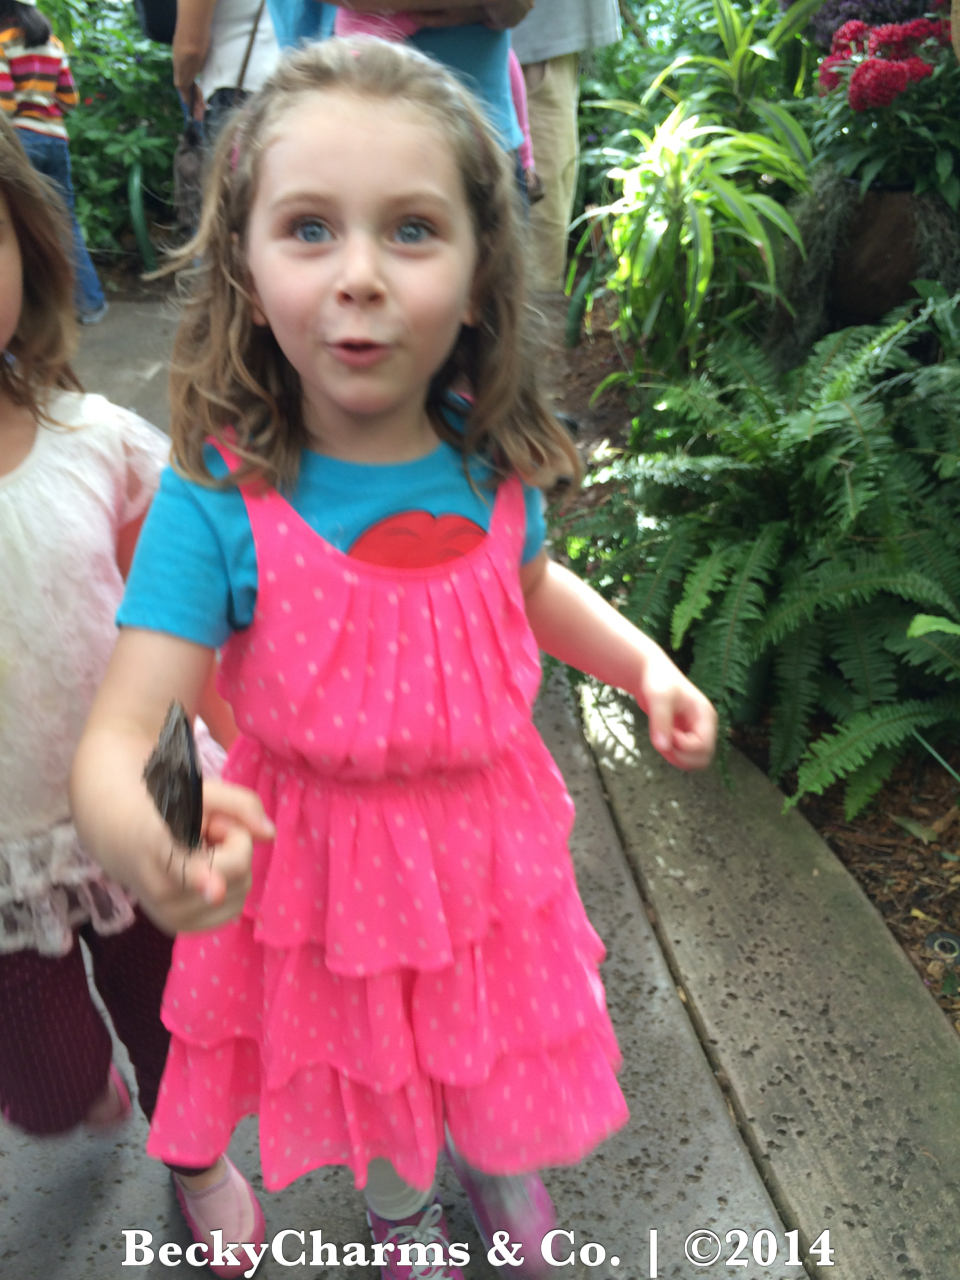 Our Trip to Butterfly Jungle at San Diego Safari Park for Spring Break 2014 by BeckyCharms